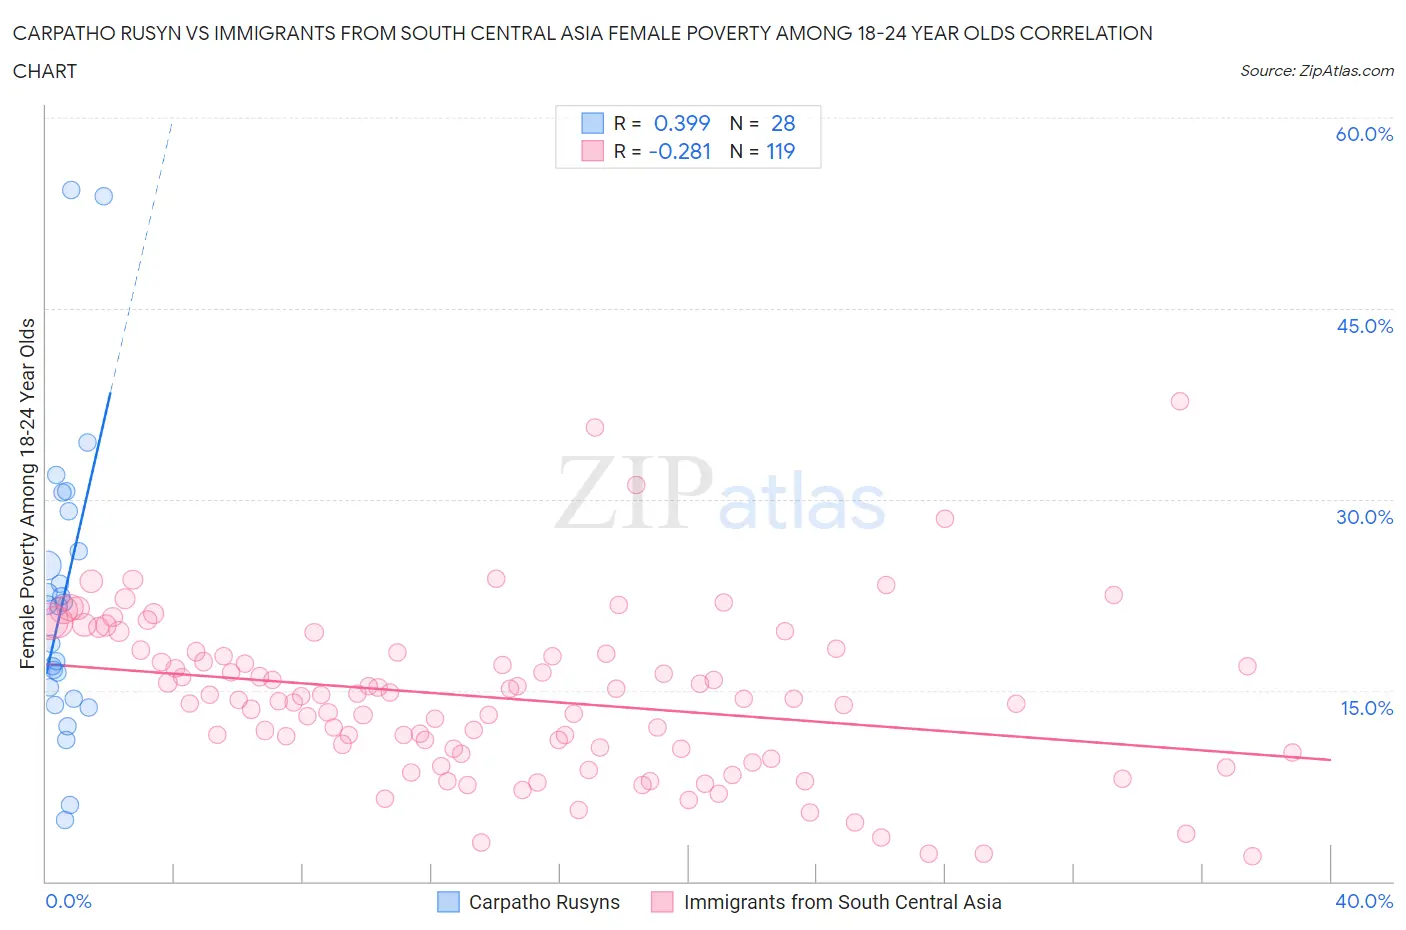 Carpatho Rusyn vs Immigrants from South Central Asia Female Poverty Among 18-24 Year Olds